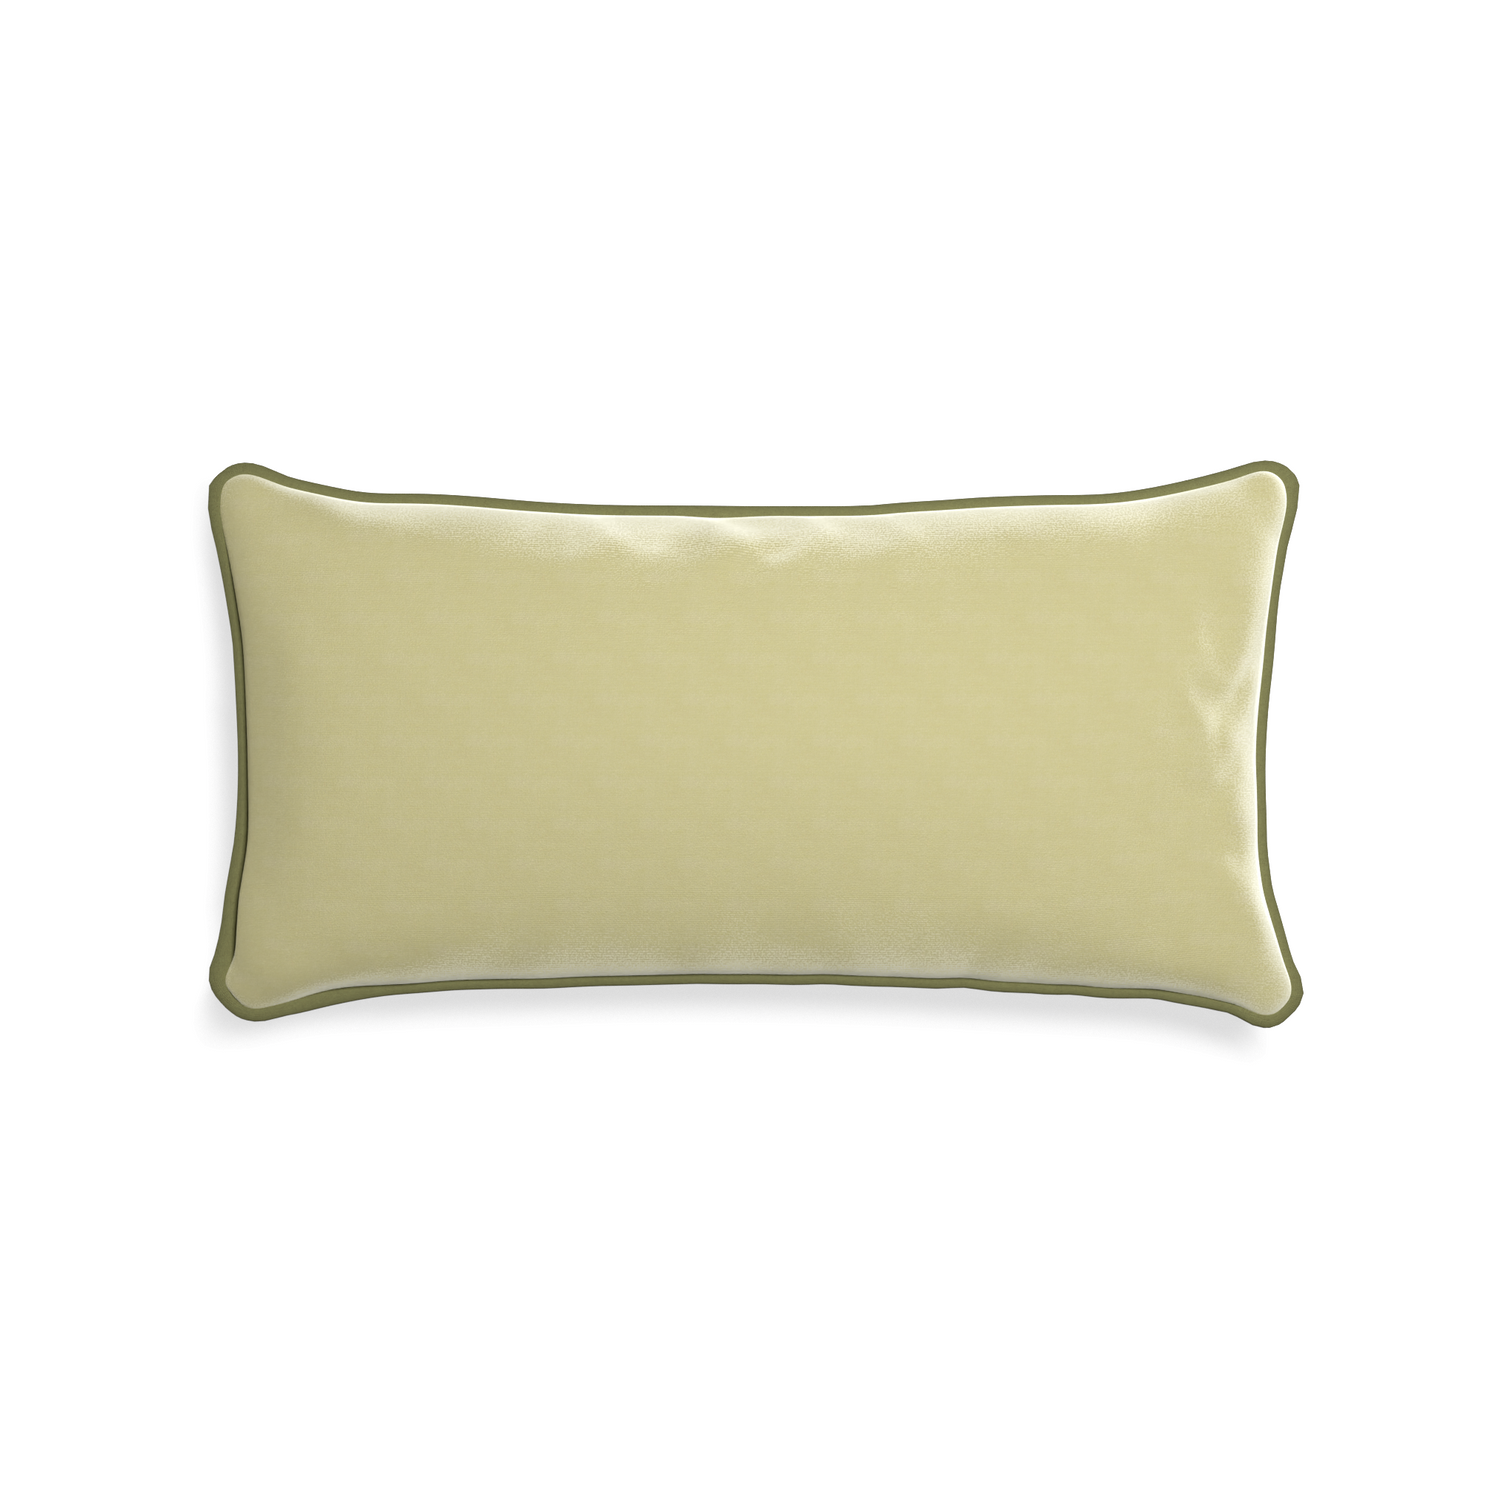 rectangle light green pillow with moss green piping